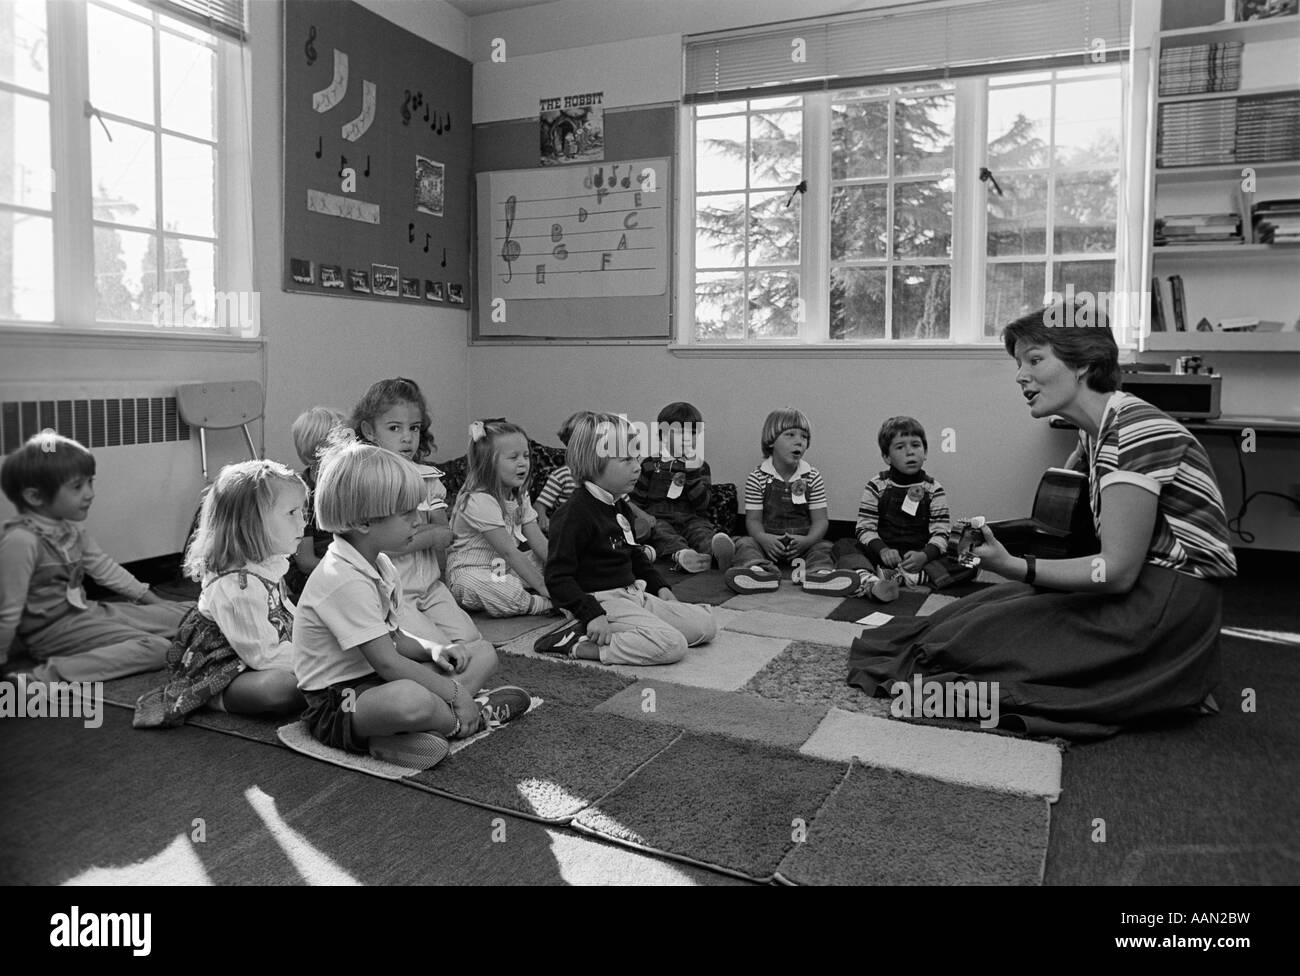 1980s GRADE SCHOOL TEACHER SITTING ON FLOOR WITH STUDENTS PLAYING GUITAR & SINGING Stock Photo